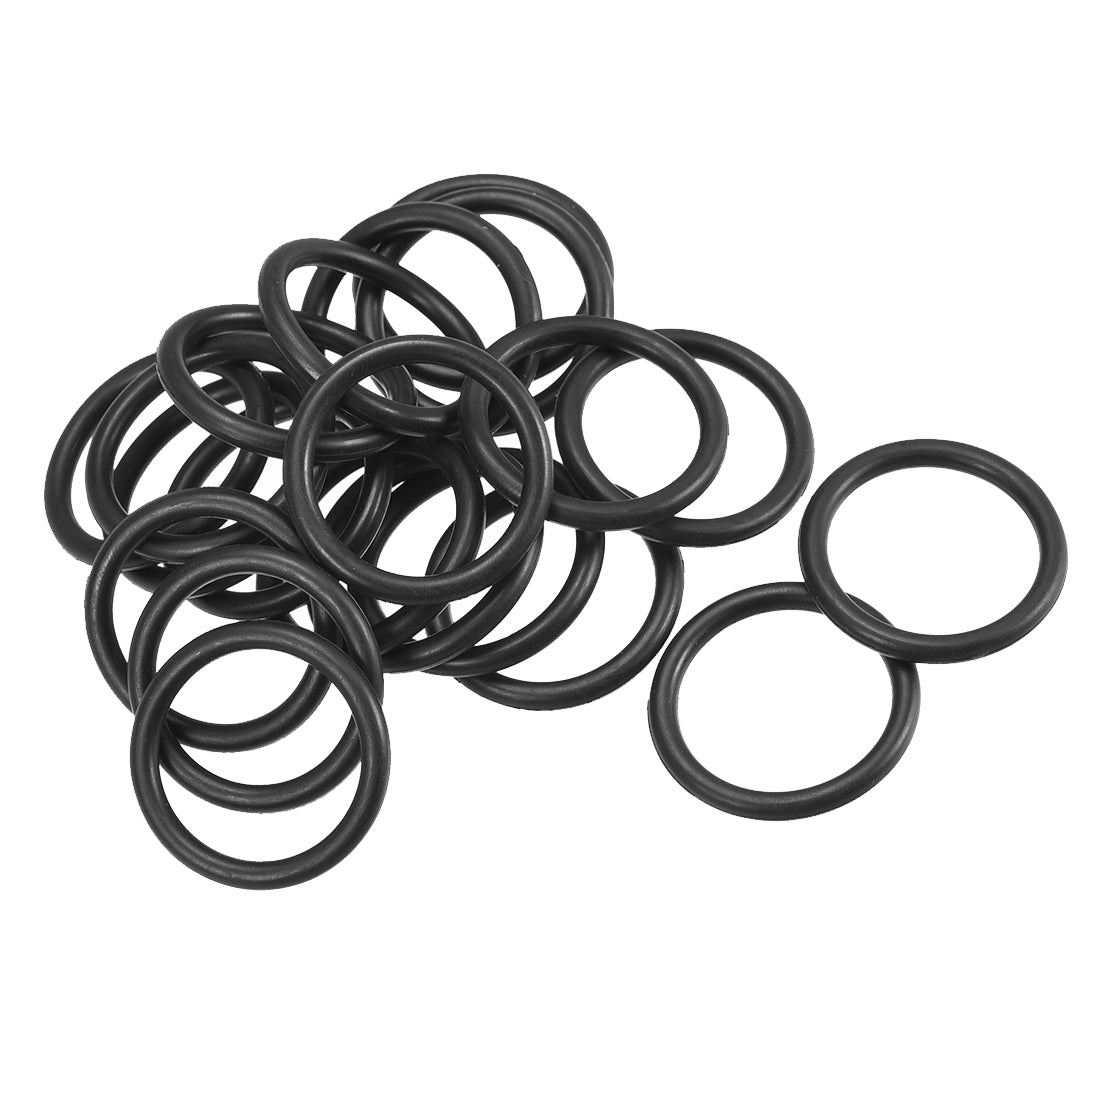 uxcell Uxcell 20 Pcs 28mm x 3mm Rubber O Type Sealing Ring Gasket Grommets Black